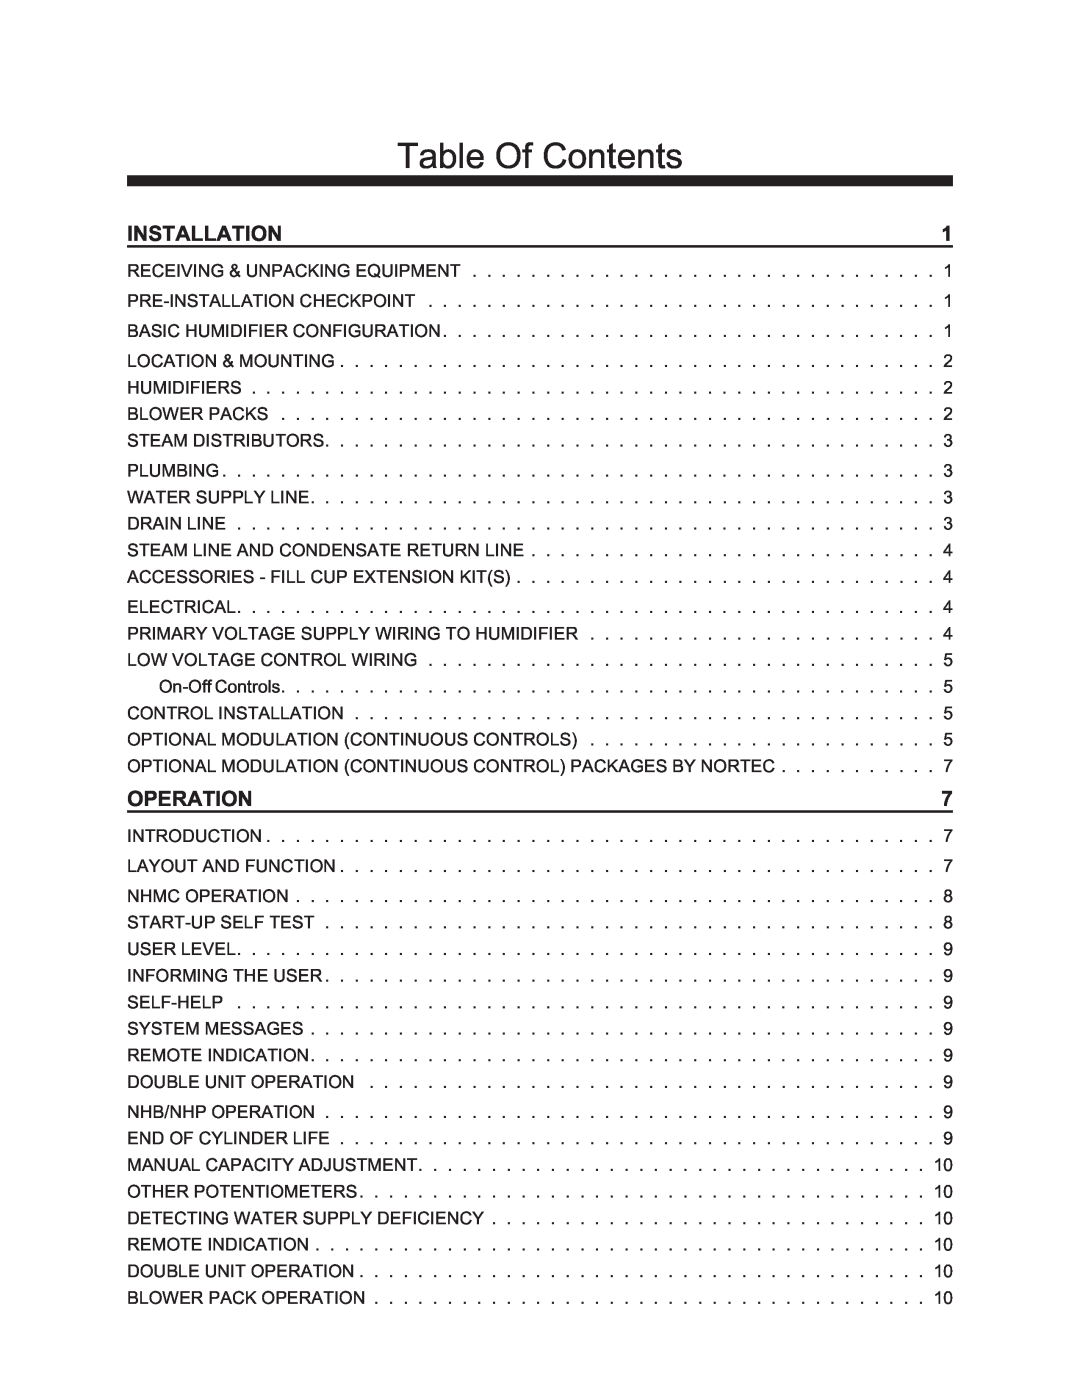 Nortec 132-3091 manual Table Of Contents, Installation, Operation 